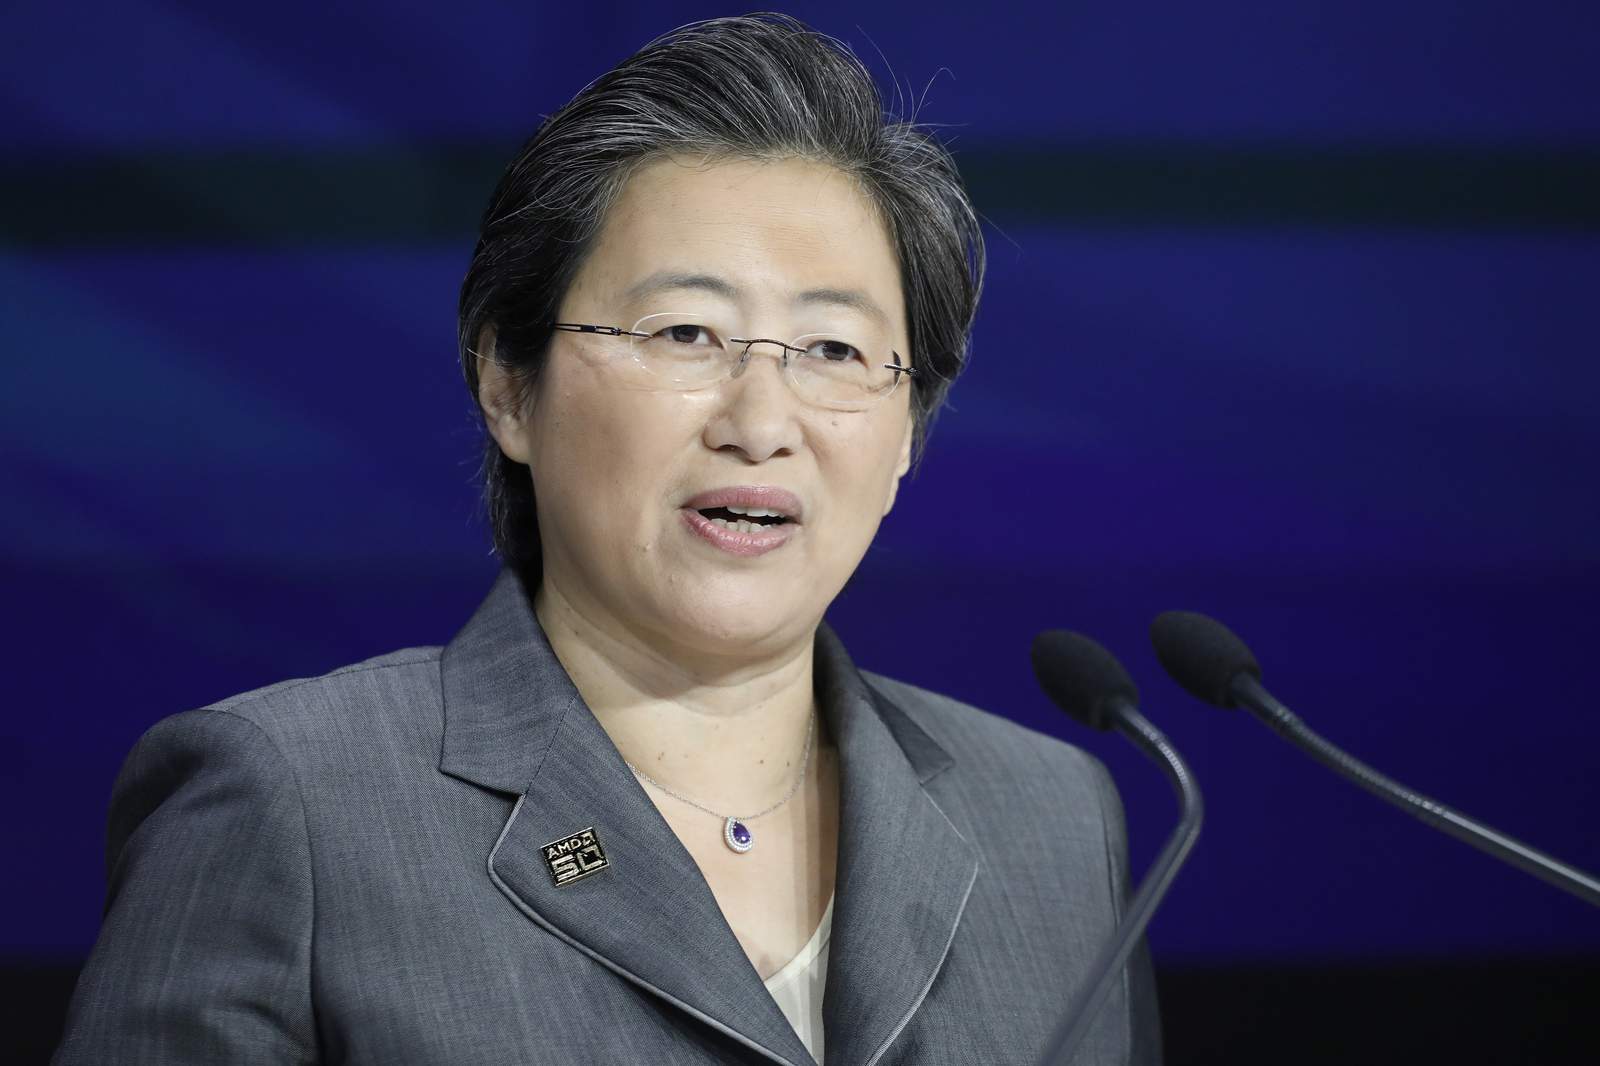 AMD's Lisa Su is first woman to top AP's CEO pay analysis